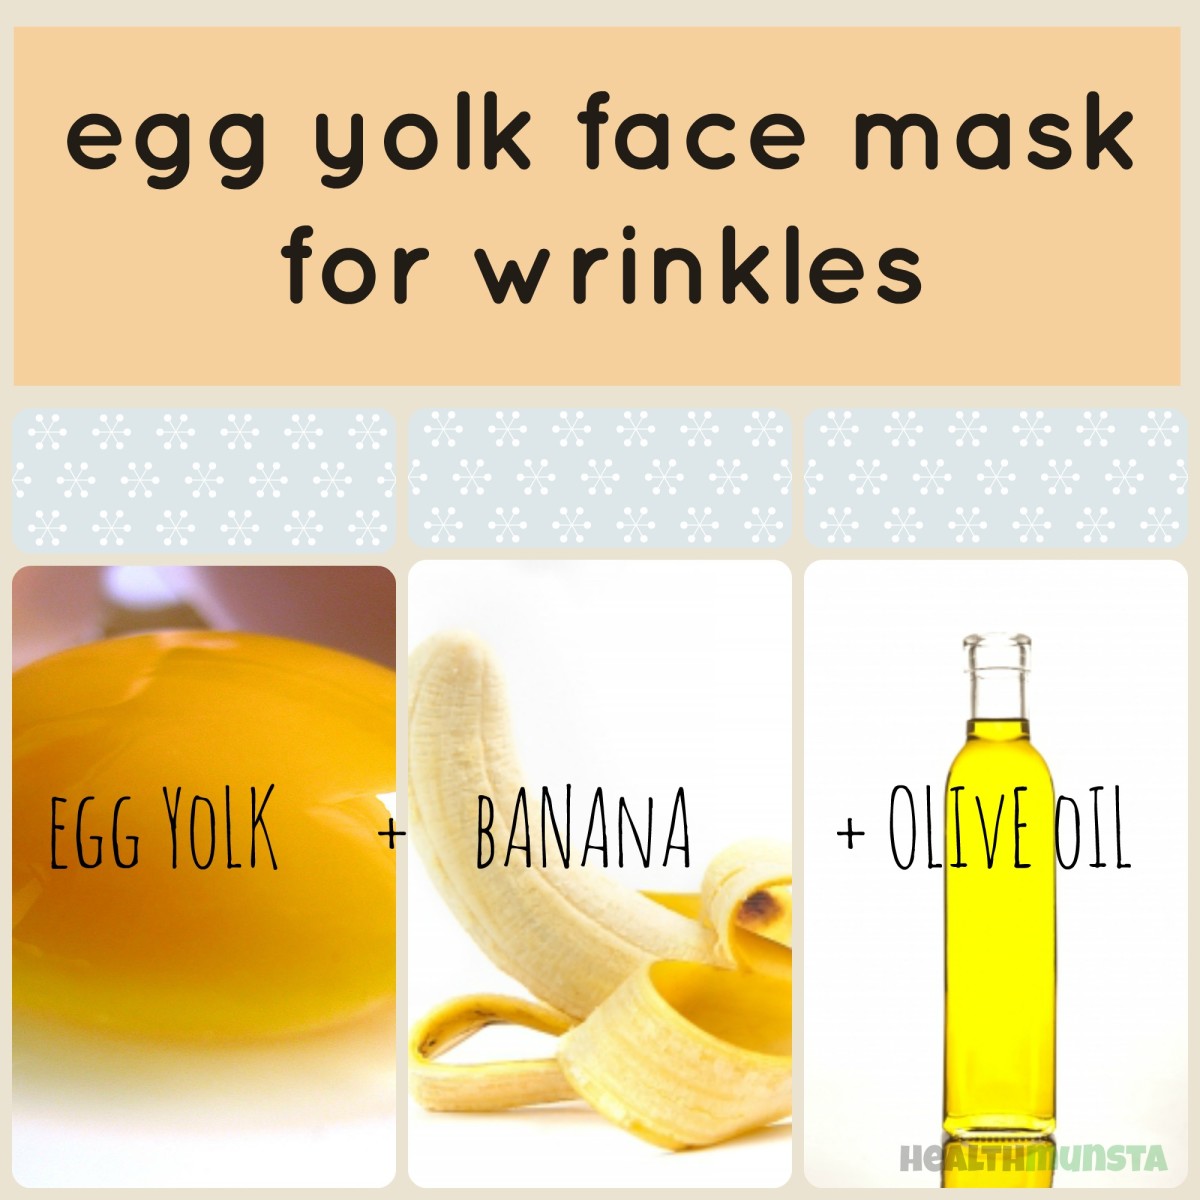 This egg yolk face mask is perfect for treating wrinkles.